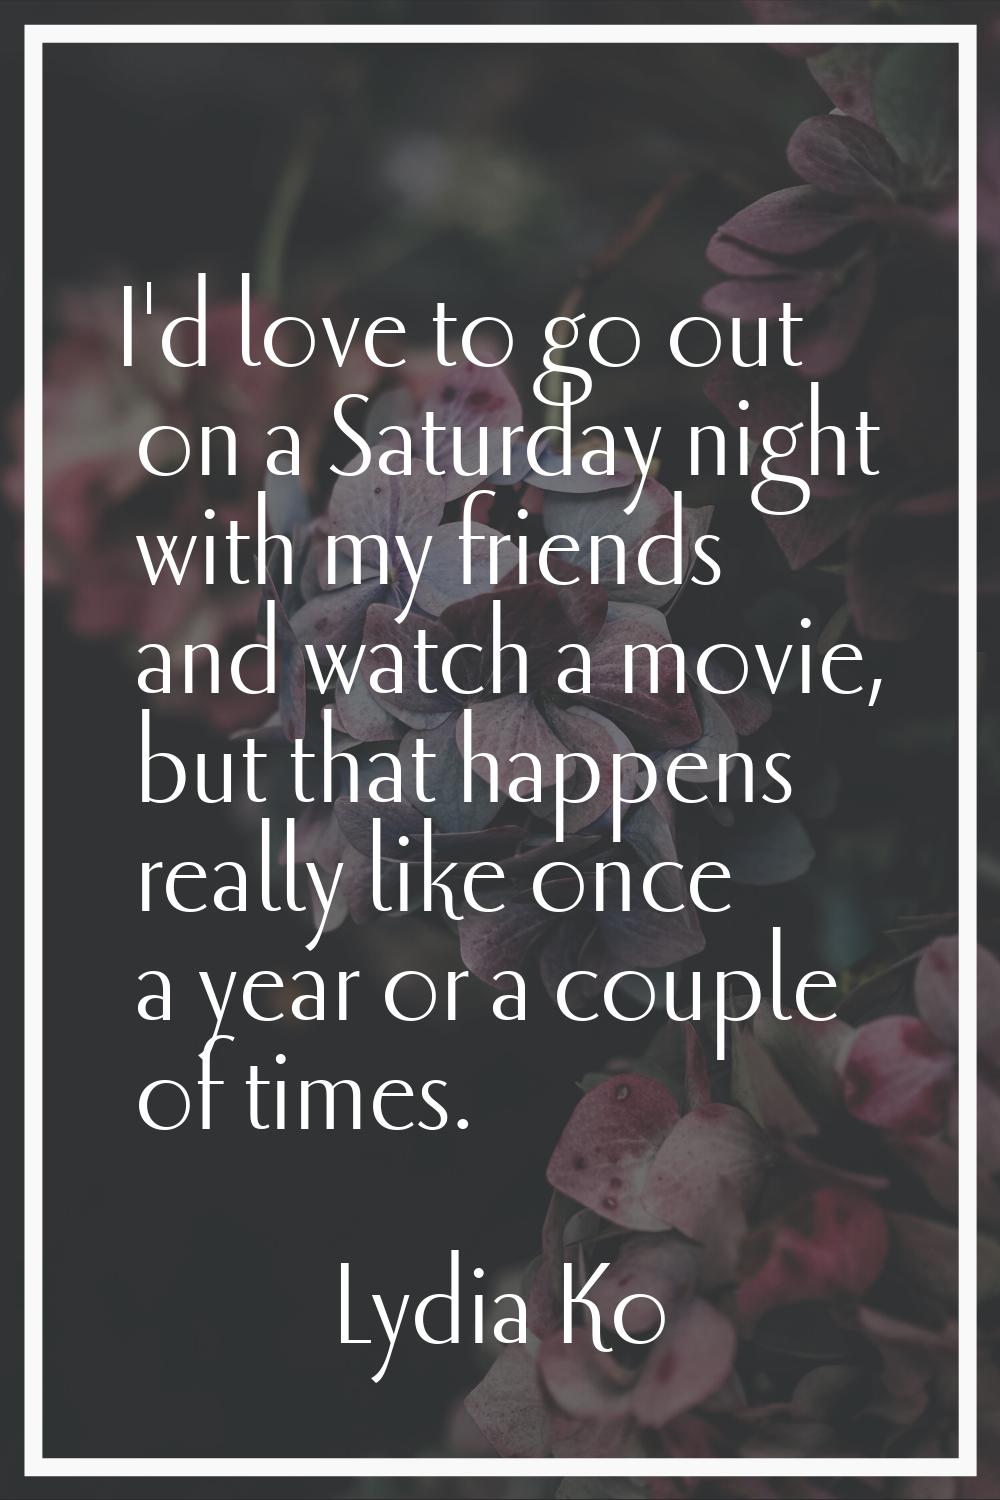 I'd love to go out on a Saturday night with my friends and watch a movie, but that happens really l